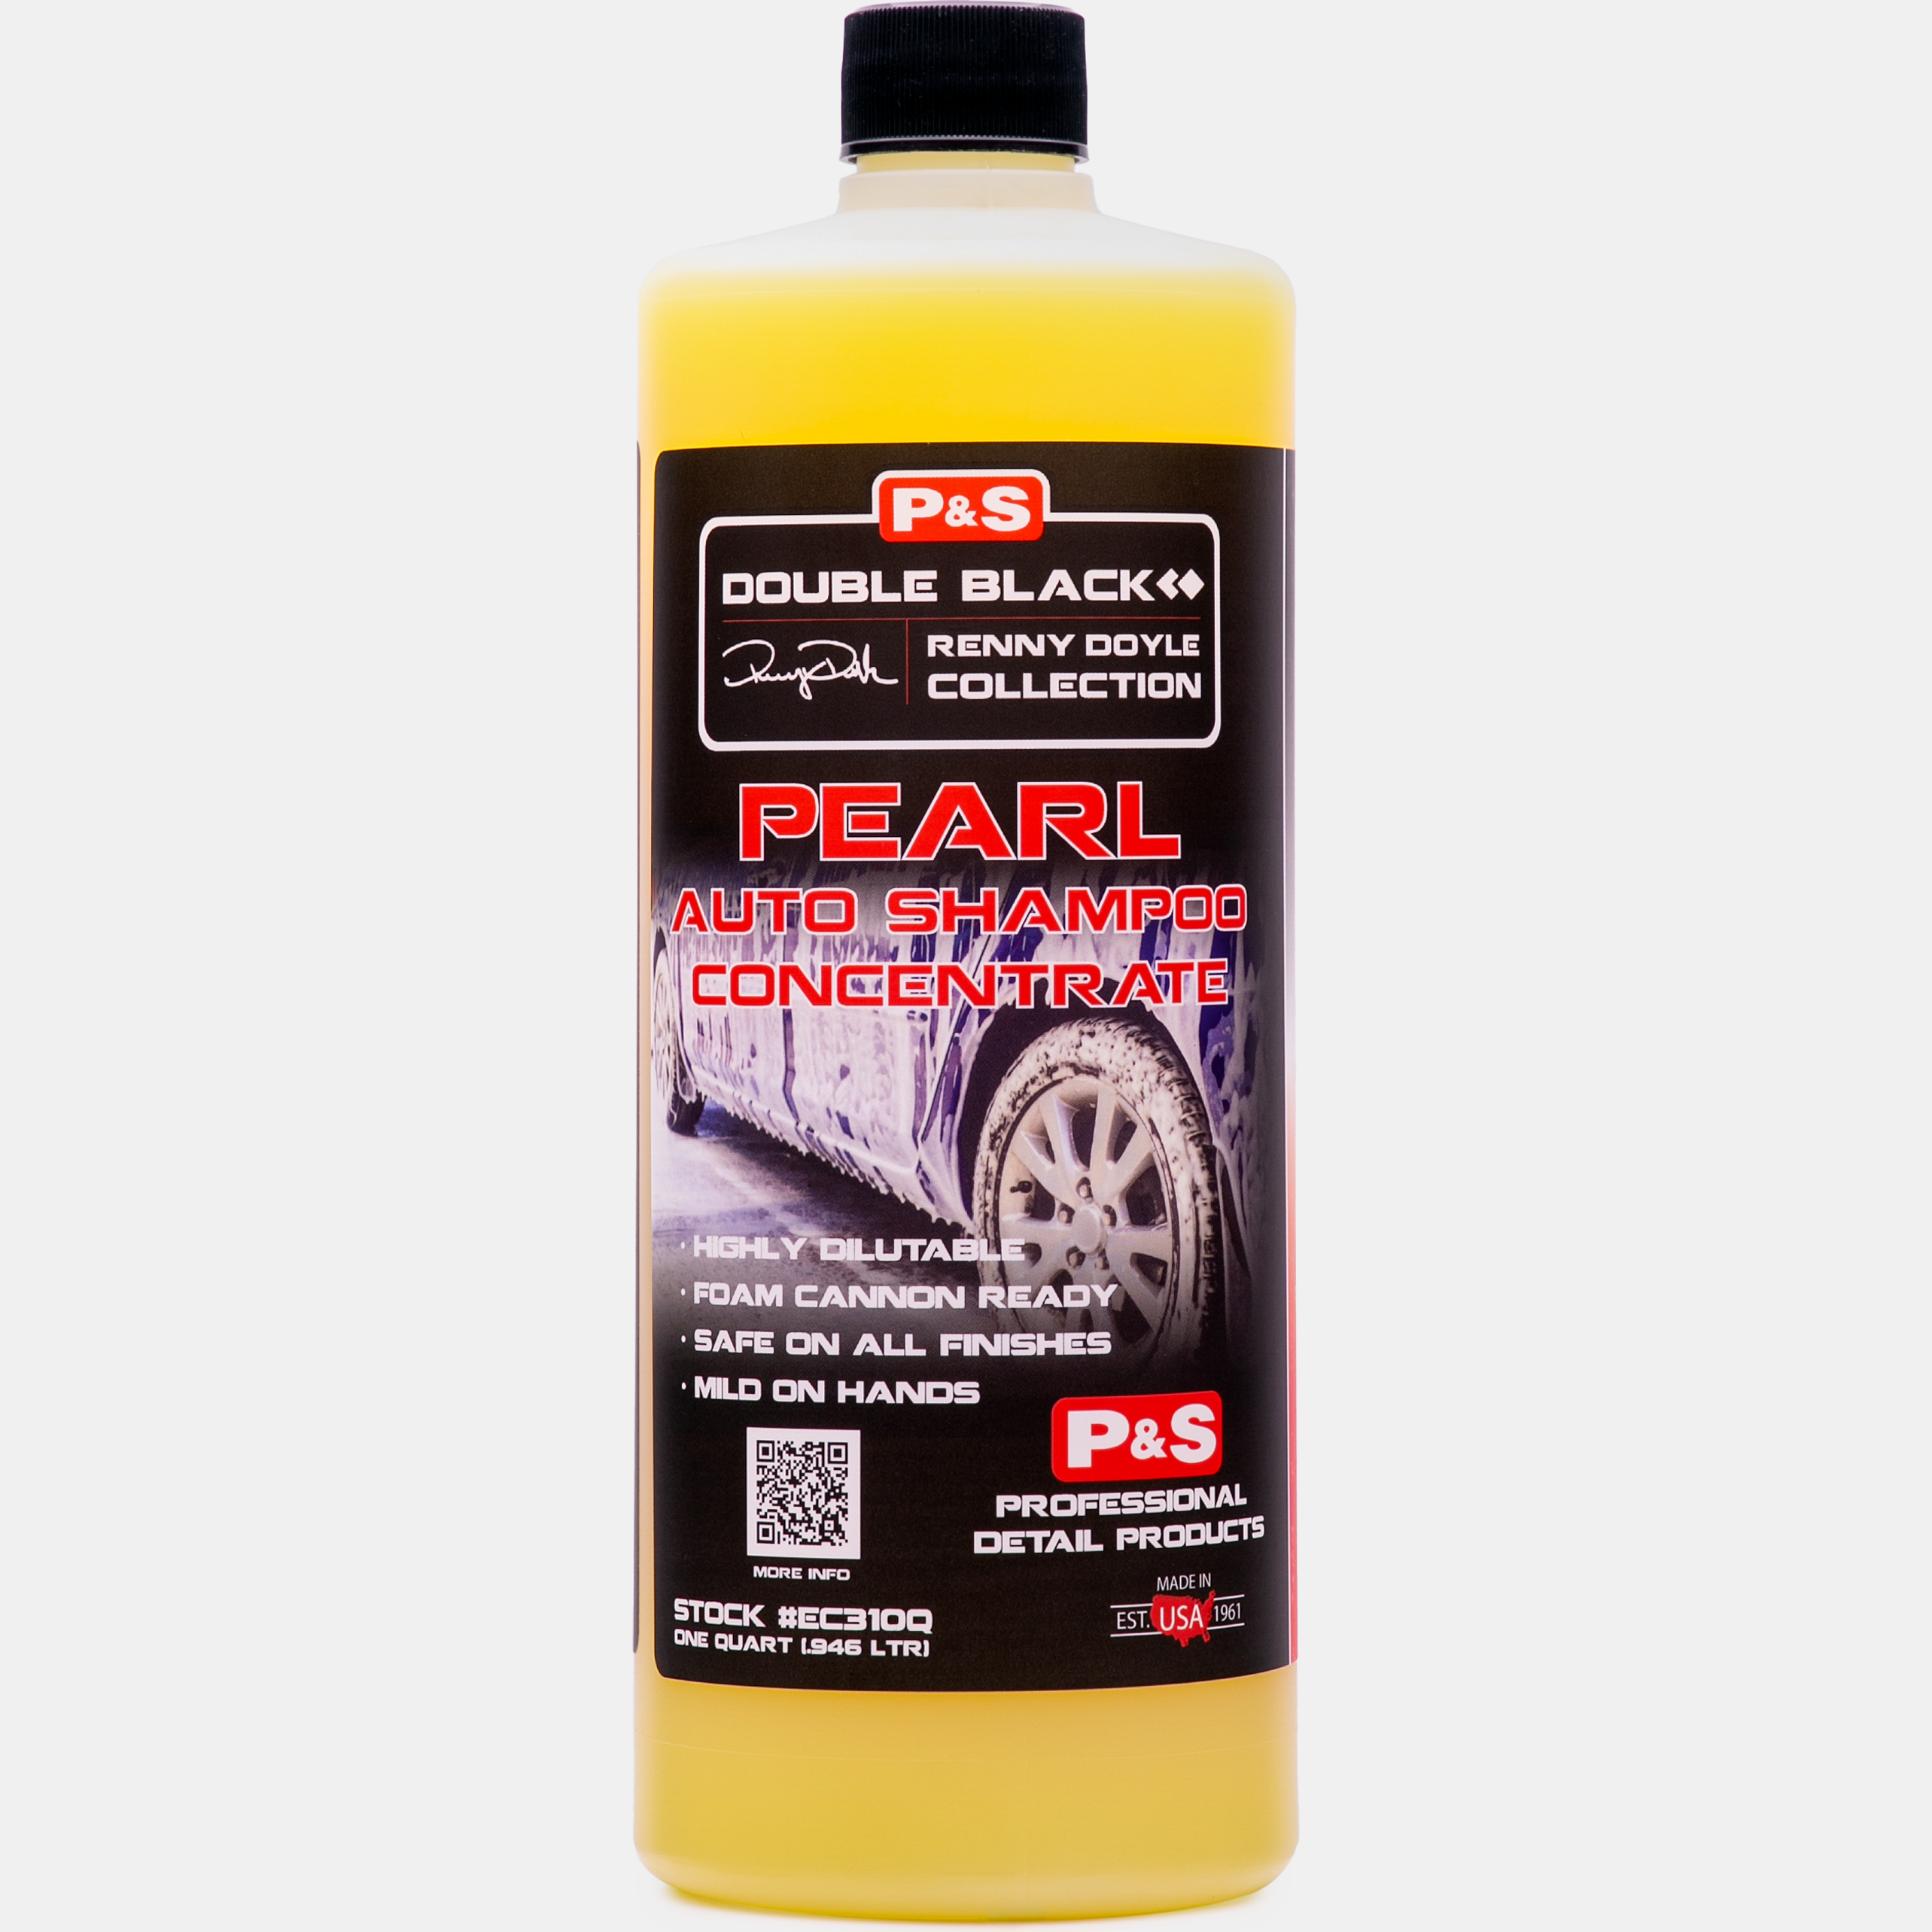 Pearl Auto Shampoo – P & S Detail Products